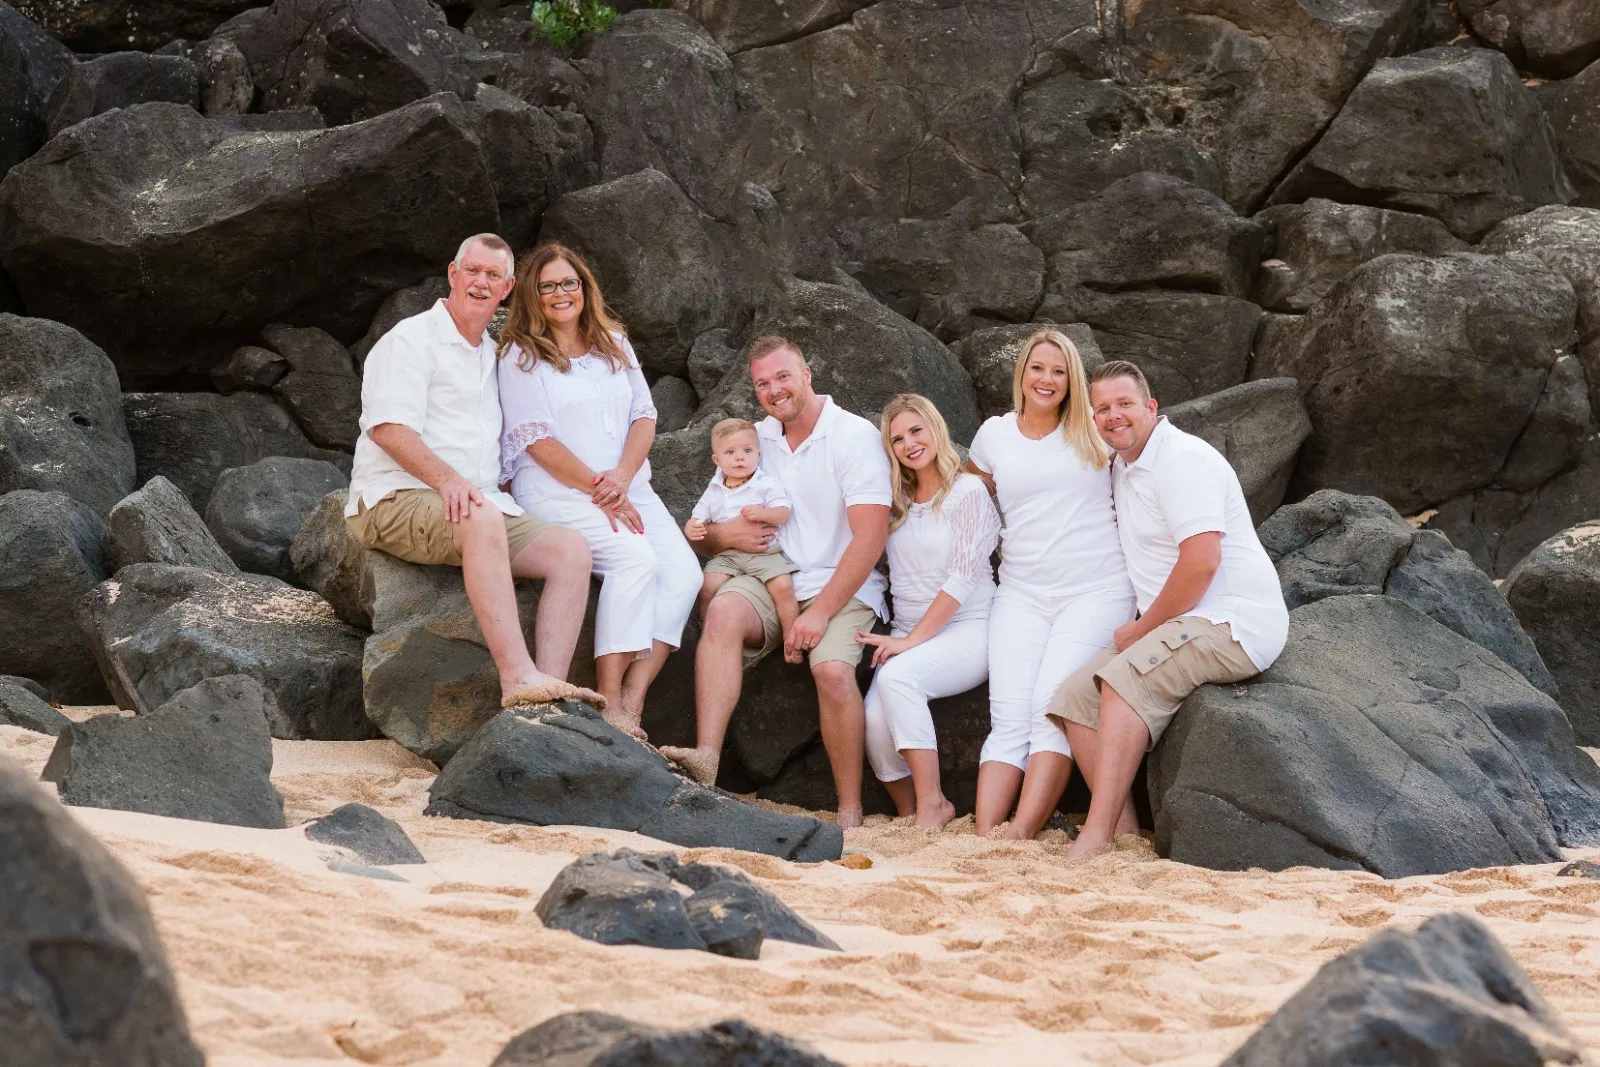 A perfect family photoshoot captured by the best hawaiian photographer the Oahu Hawaii Photographer